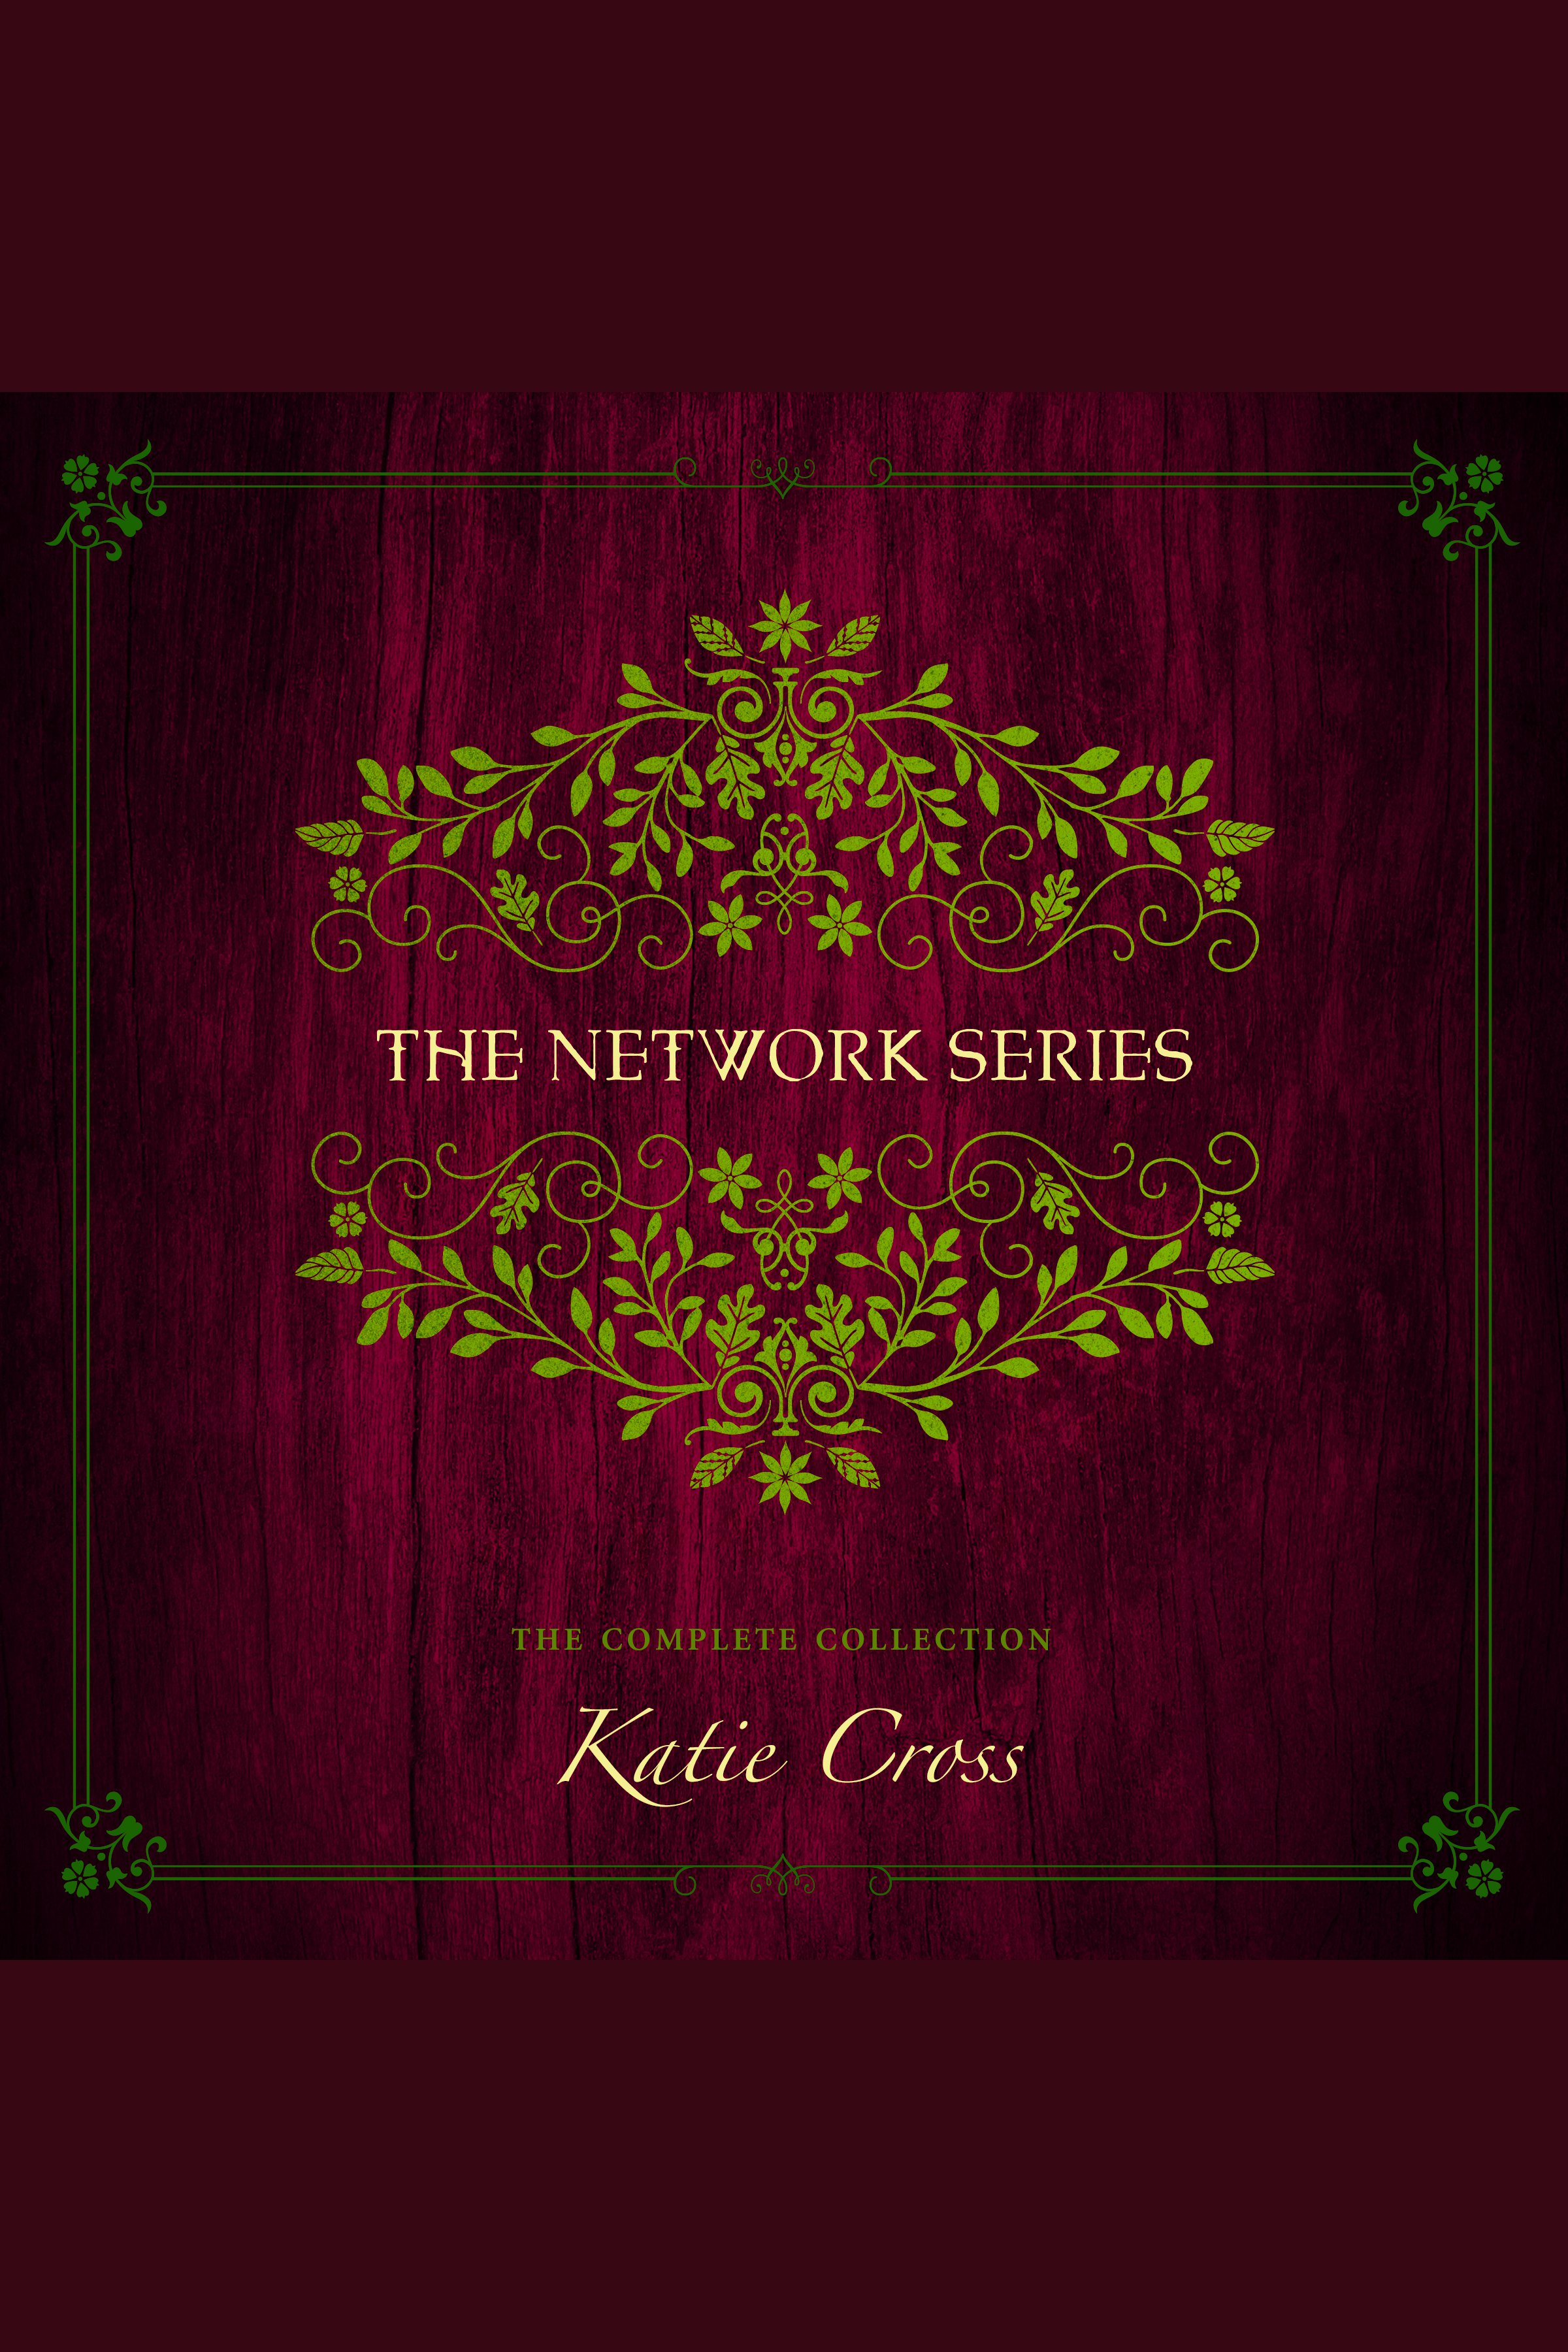 The Network Series Collection cover image